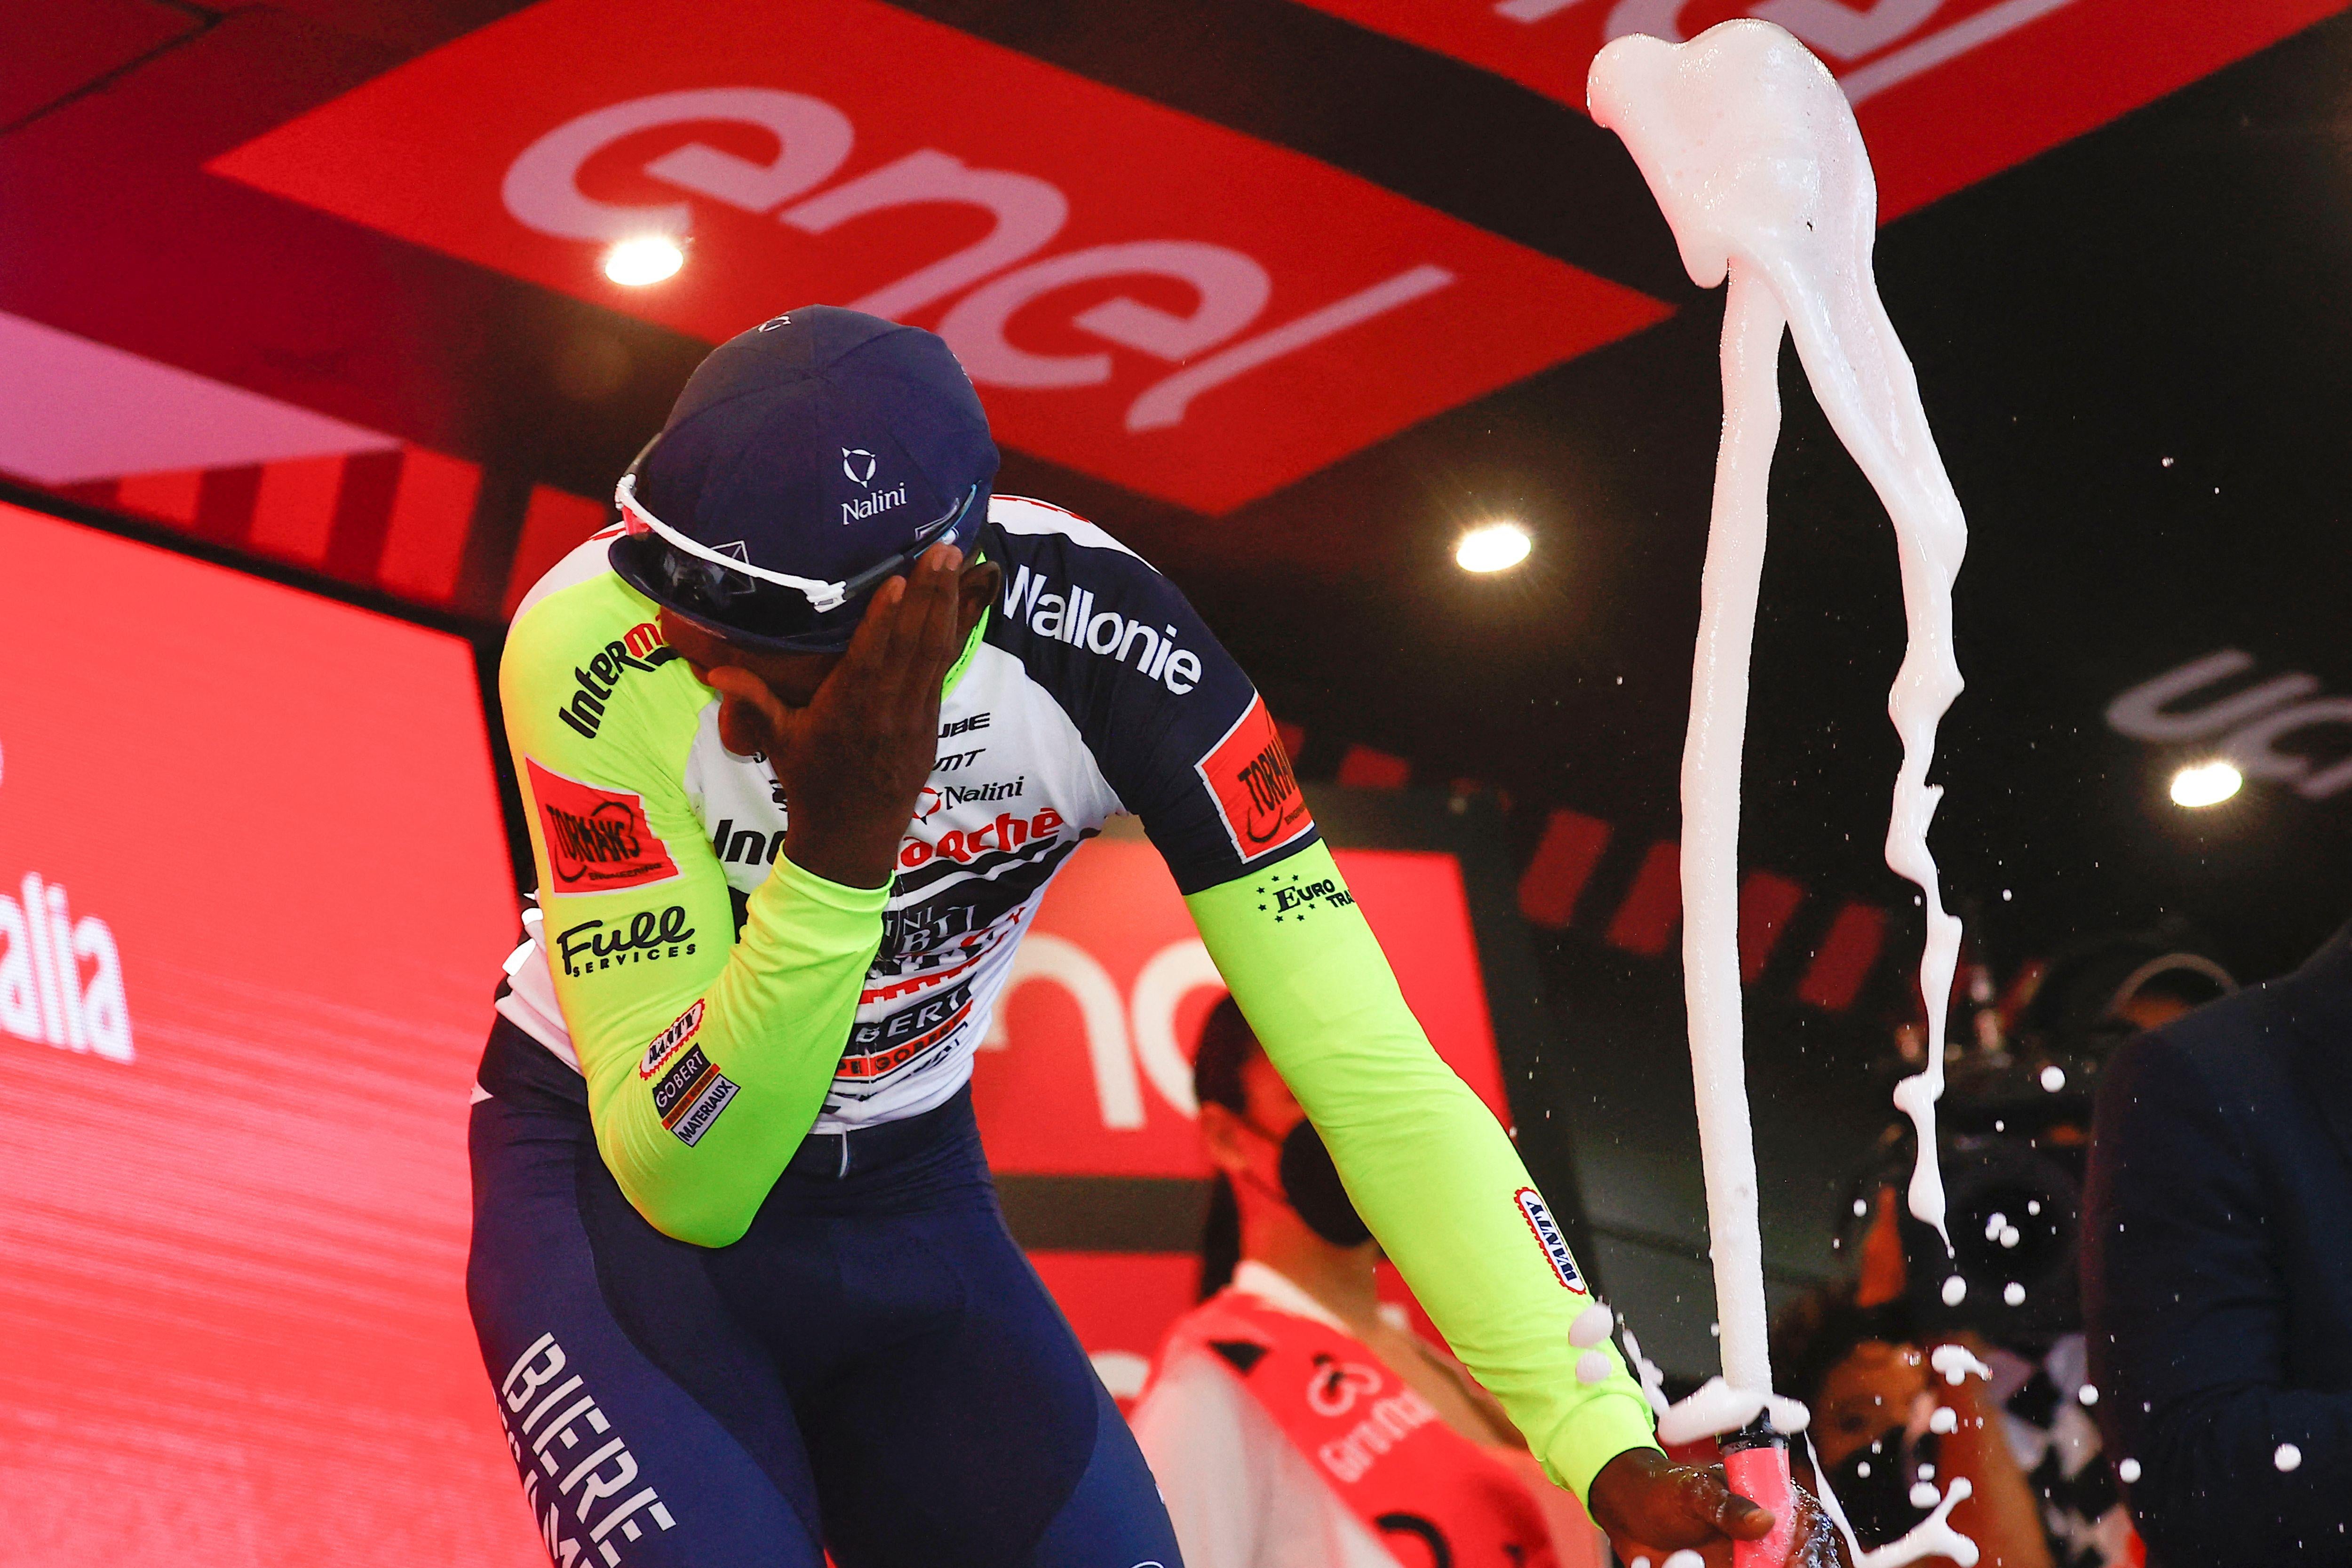 A cyclist winces and holds a hand up to his left eye as he holds a spewing Prosecco bottle in his other hand.